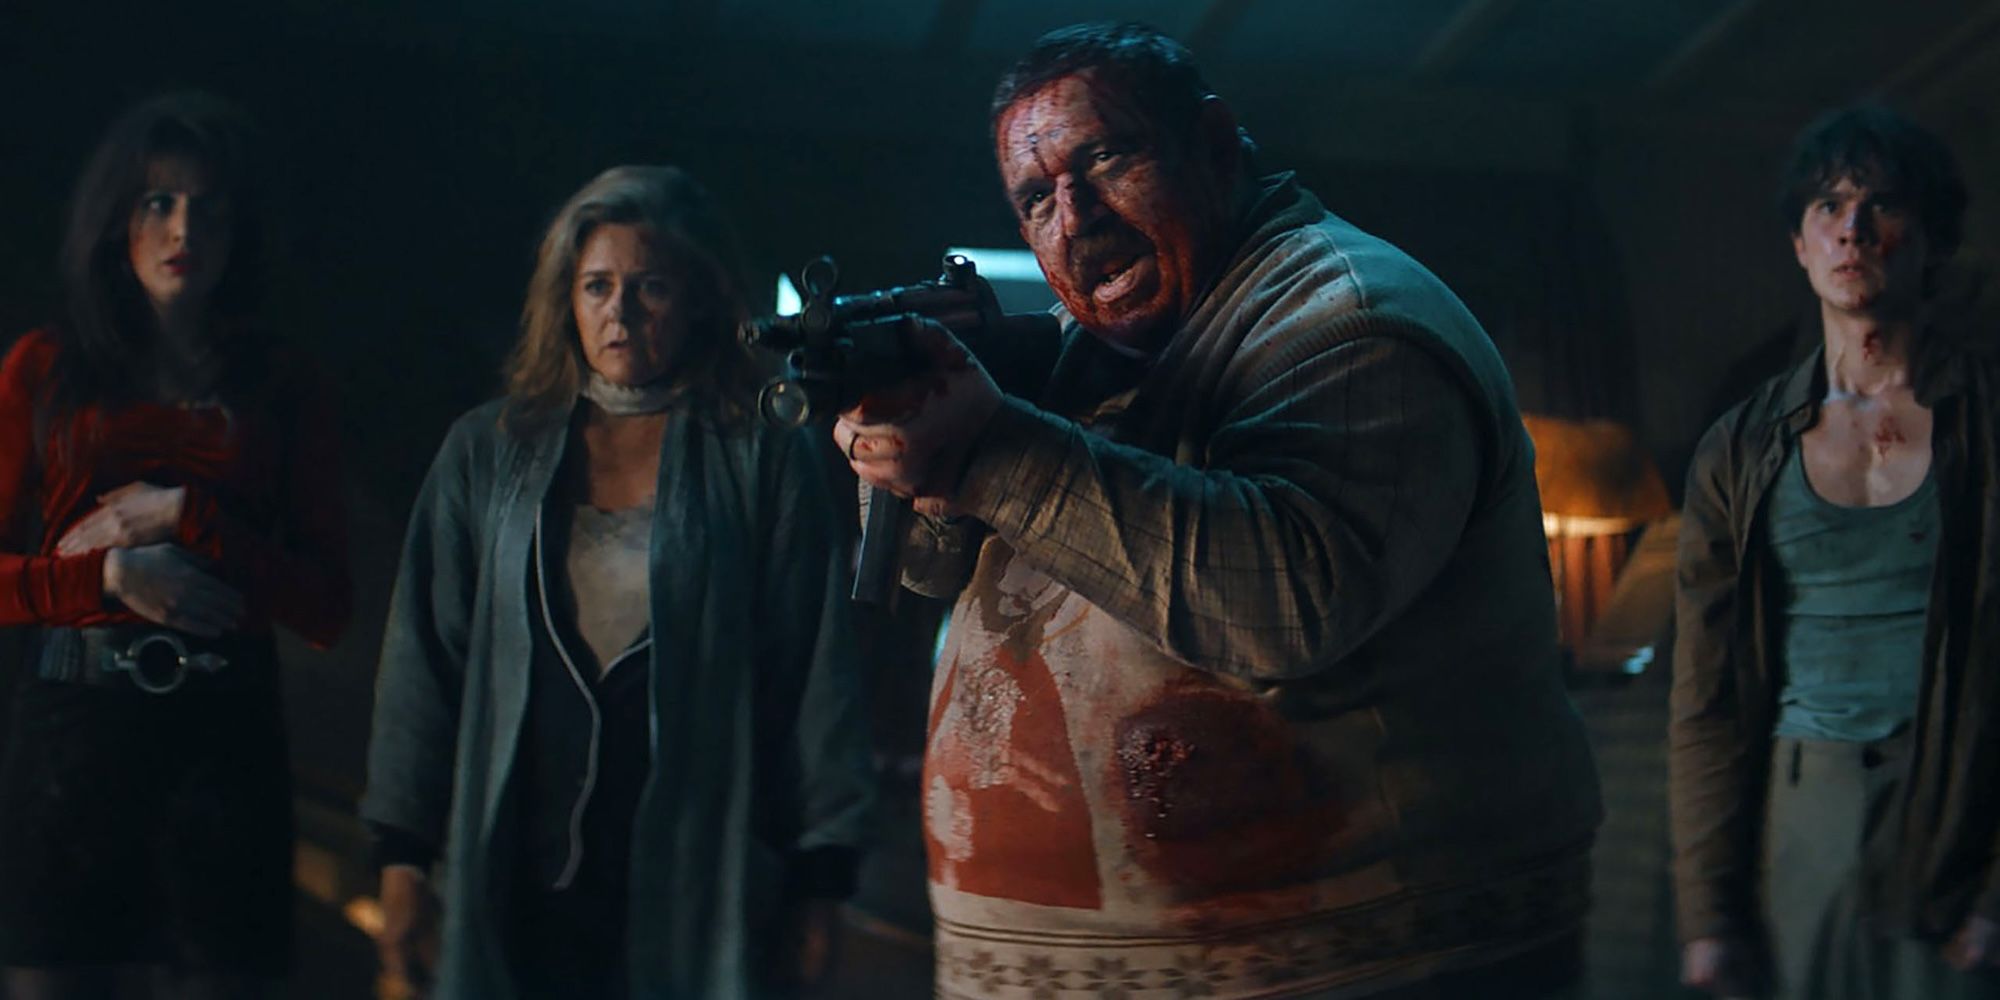 Nick Frost's Bernie aims a gun at intruders in Krazy House